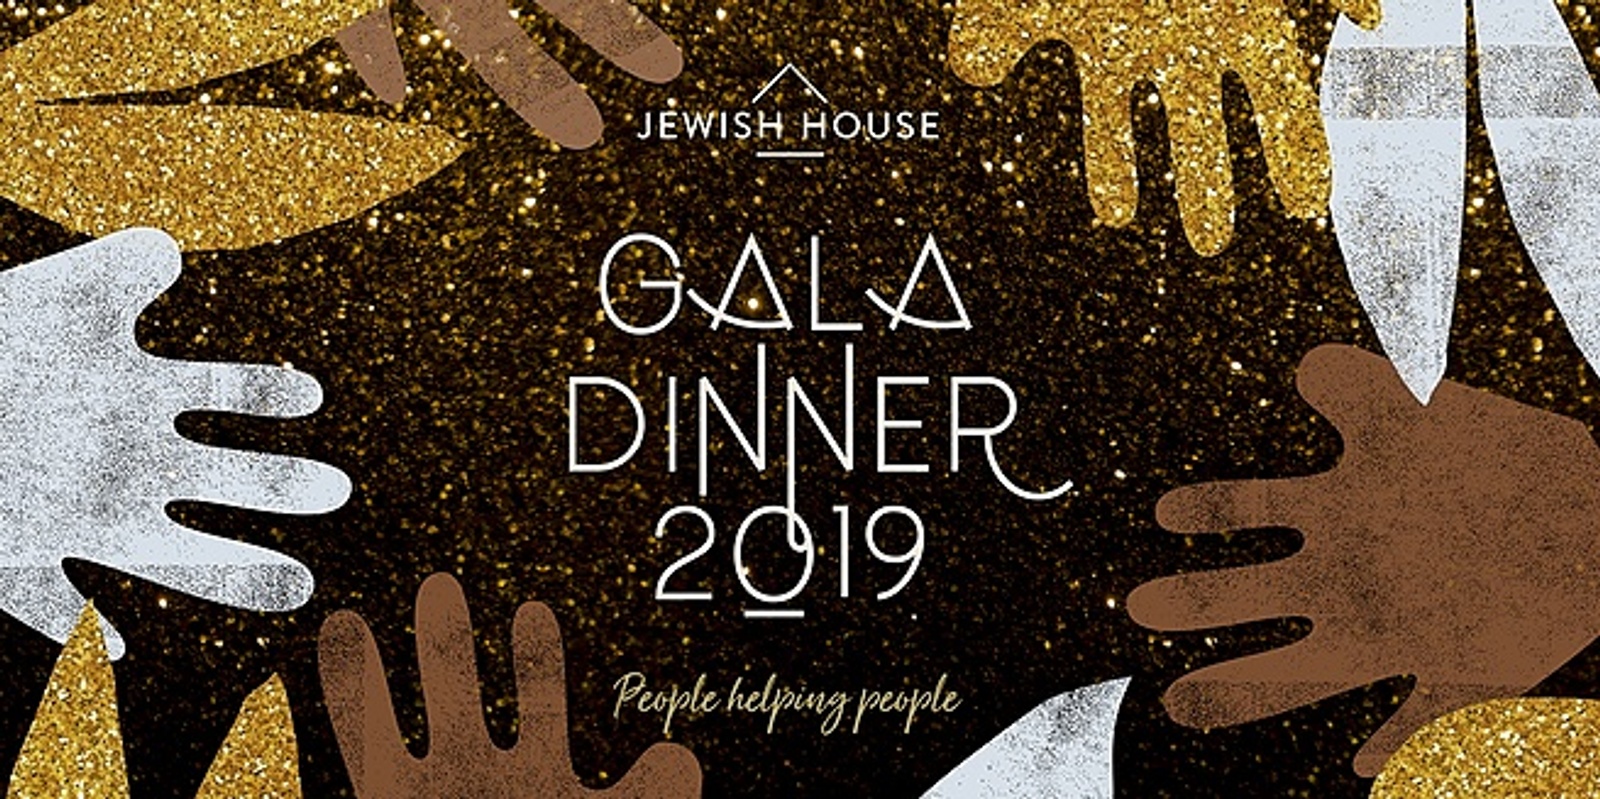 Banner image for Jewish House Gala Dinner 2019